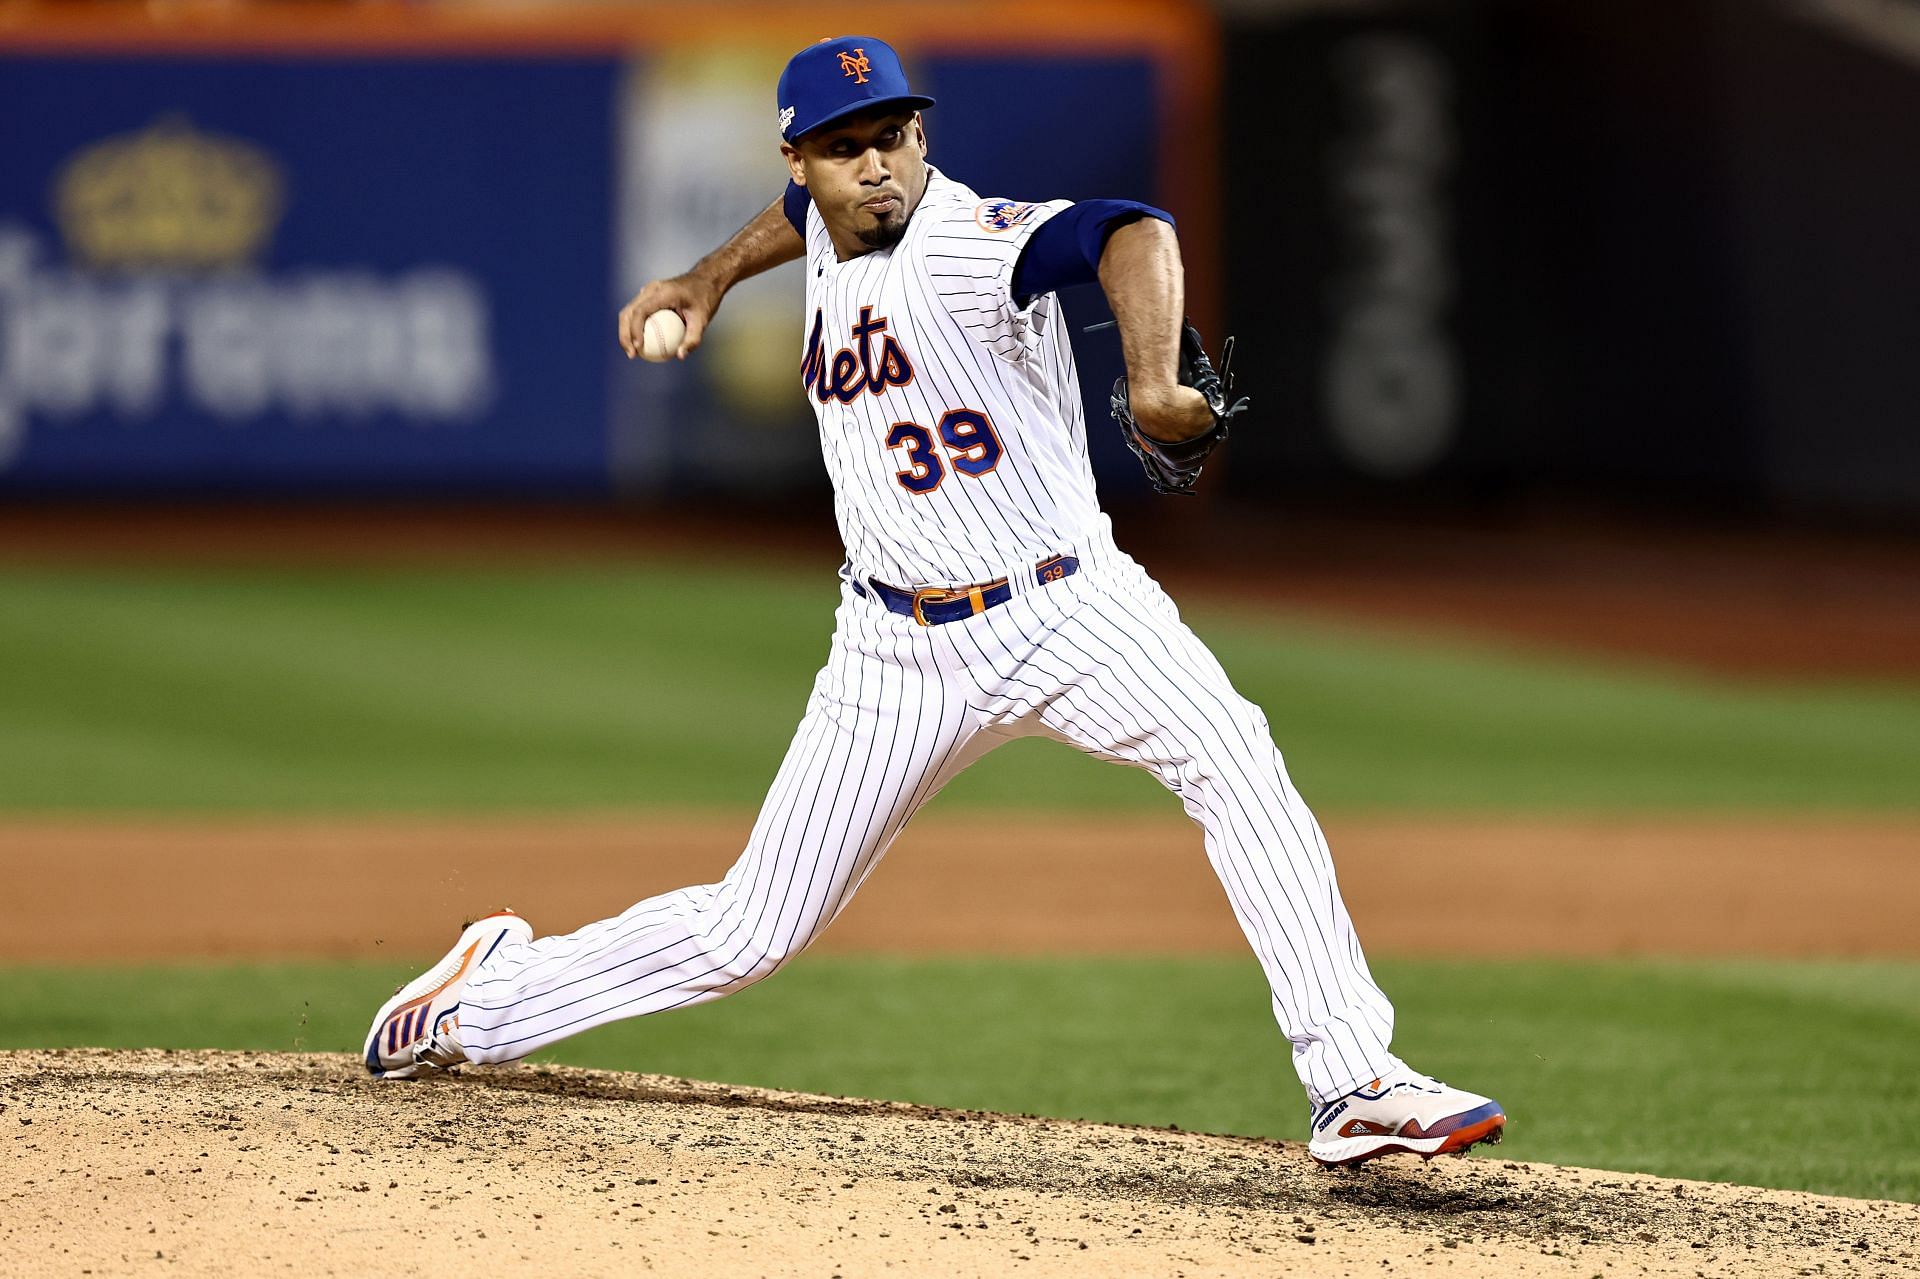 Edwin Diaz #39 of the New York Mets throws a pitch against the San Diego Padres